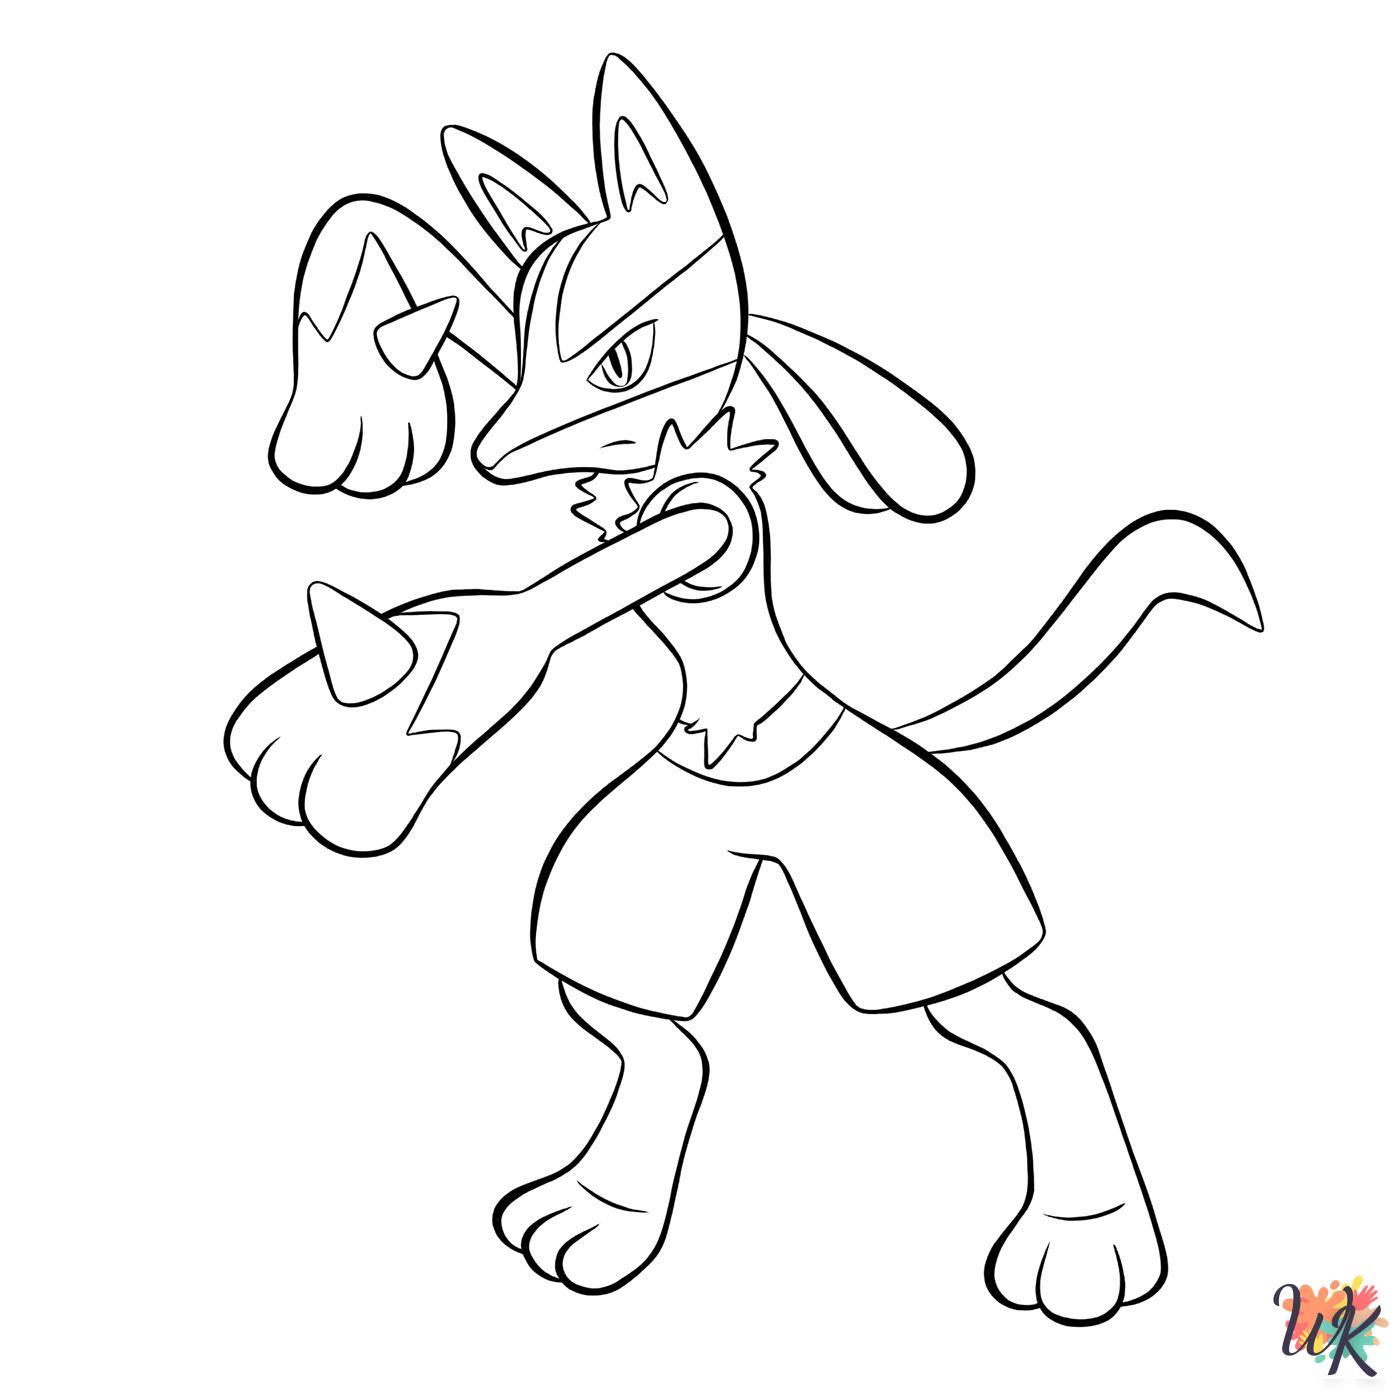 Lucario decorations coloring pages